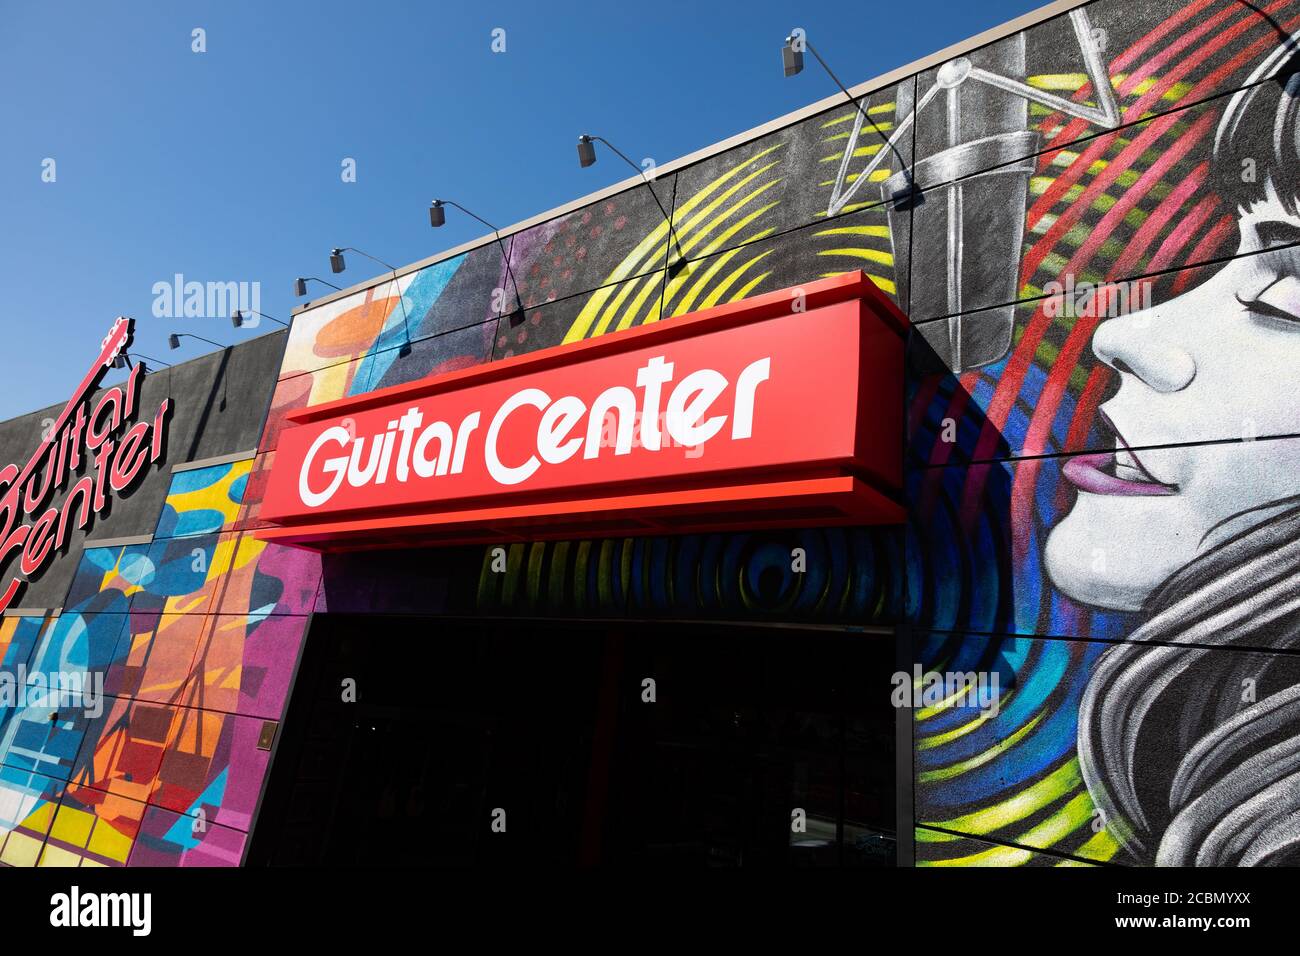 The Guitar Center, 7425 Sunset Boulevard, Los Angeles, California, United States of America Stock Photo